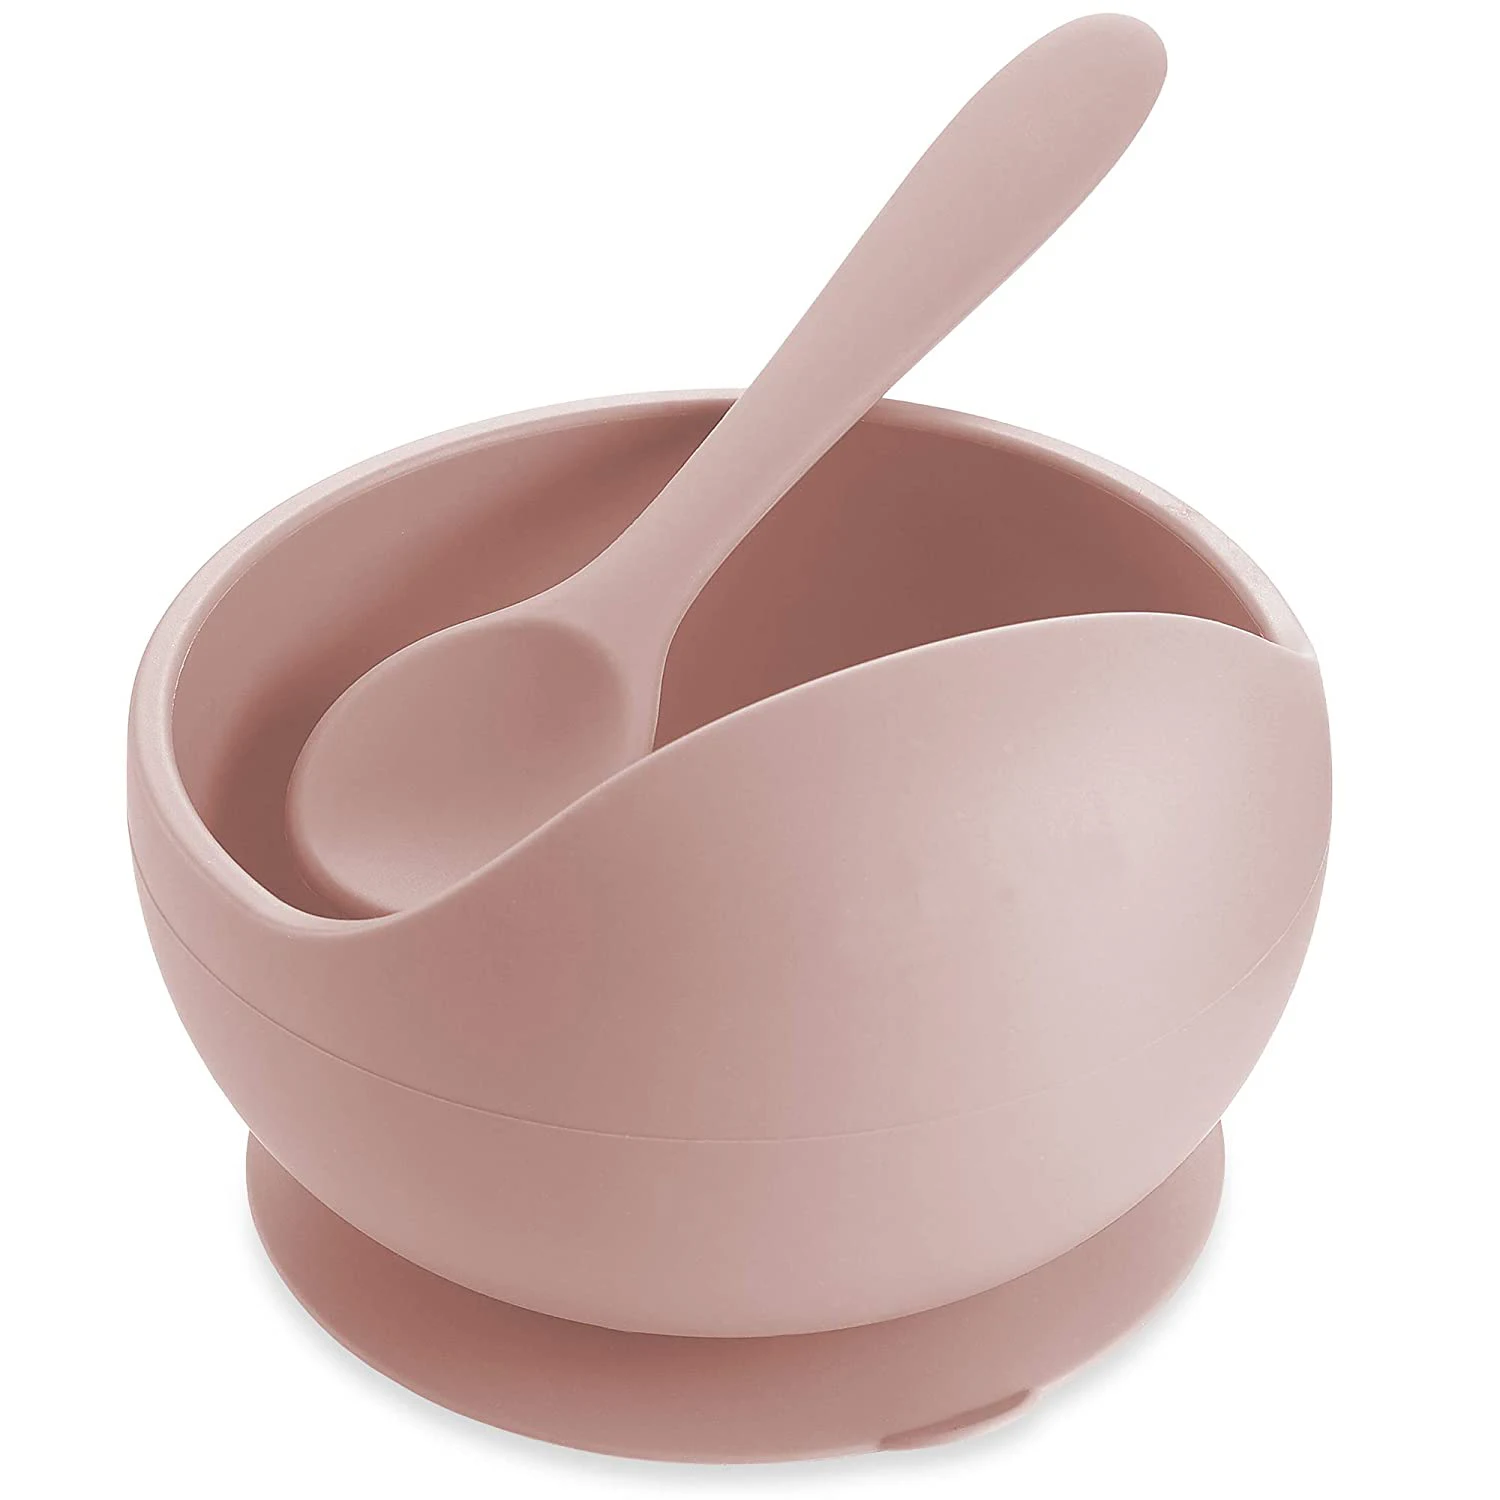 Silicone Bowl And Spoon Suction Bowl Baby Food Bowl 1set Silicone Baby Feeding Bowl Set Tableware Non Slip For Baby and Toddler